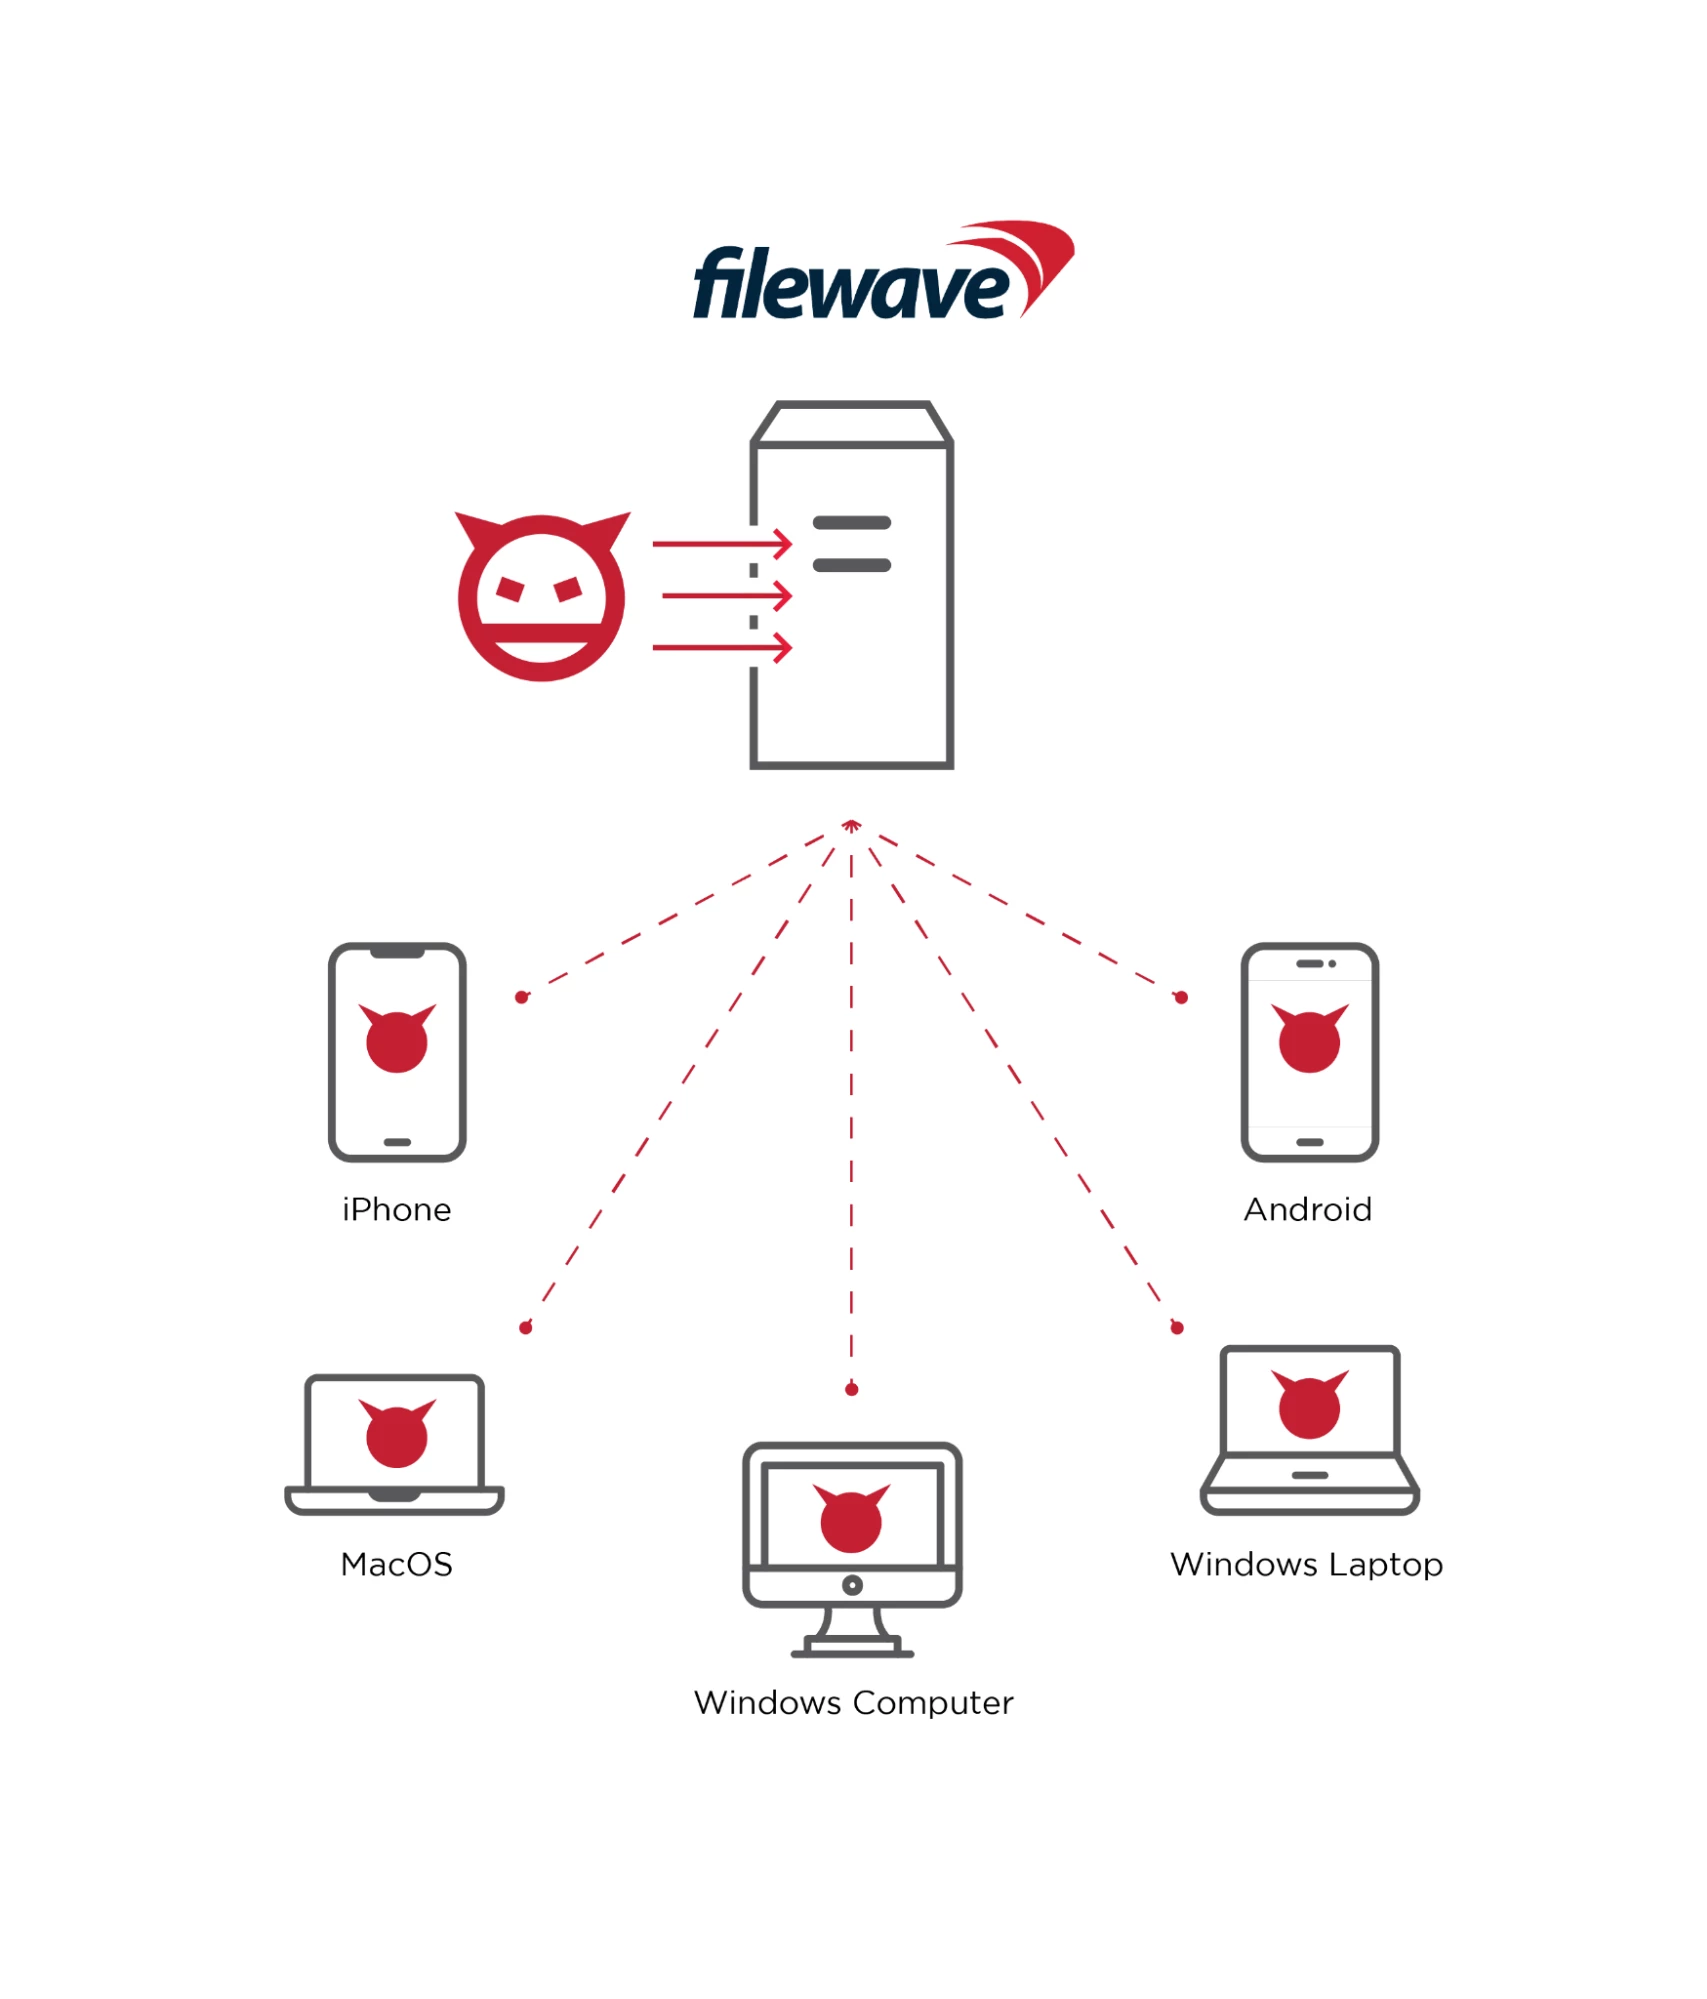 Filewave Managed Devices